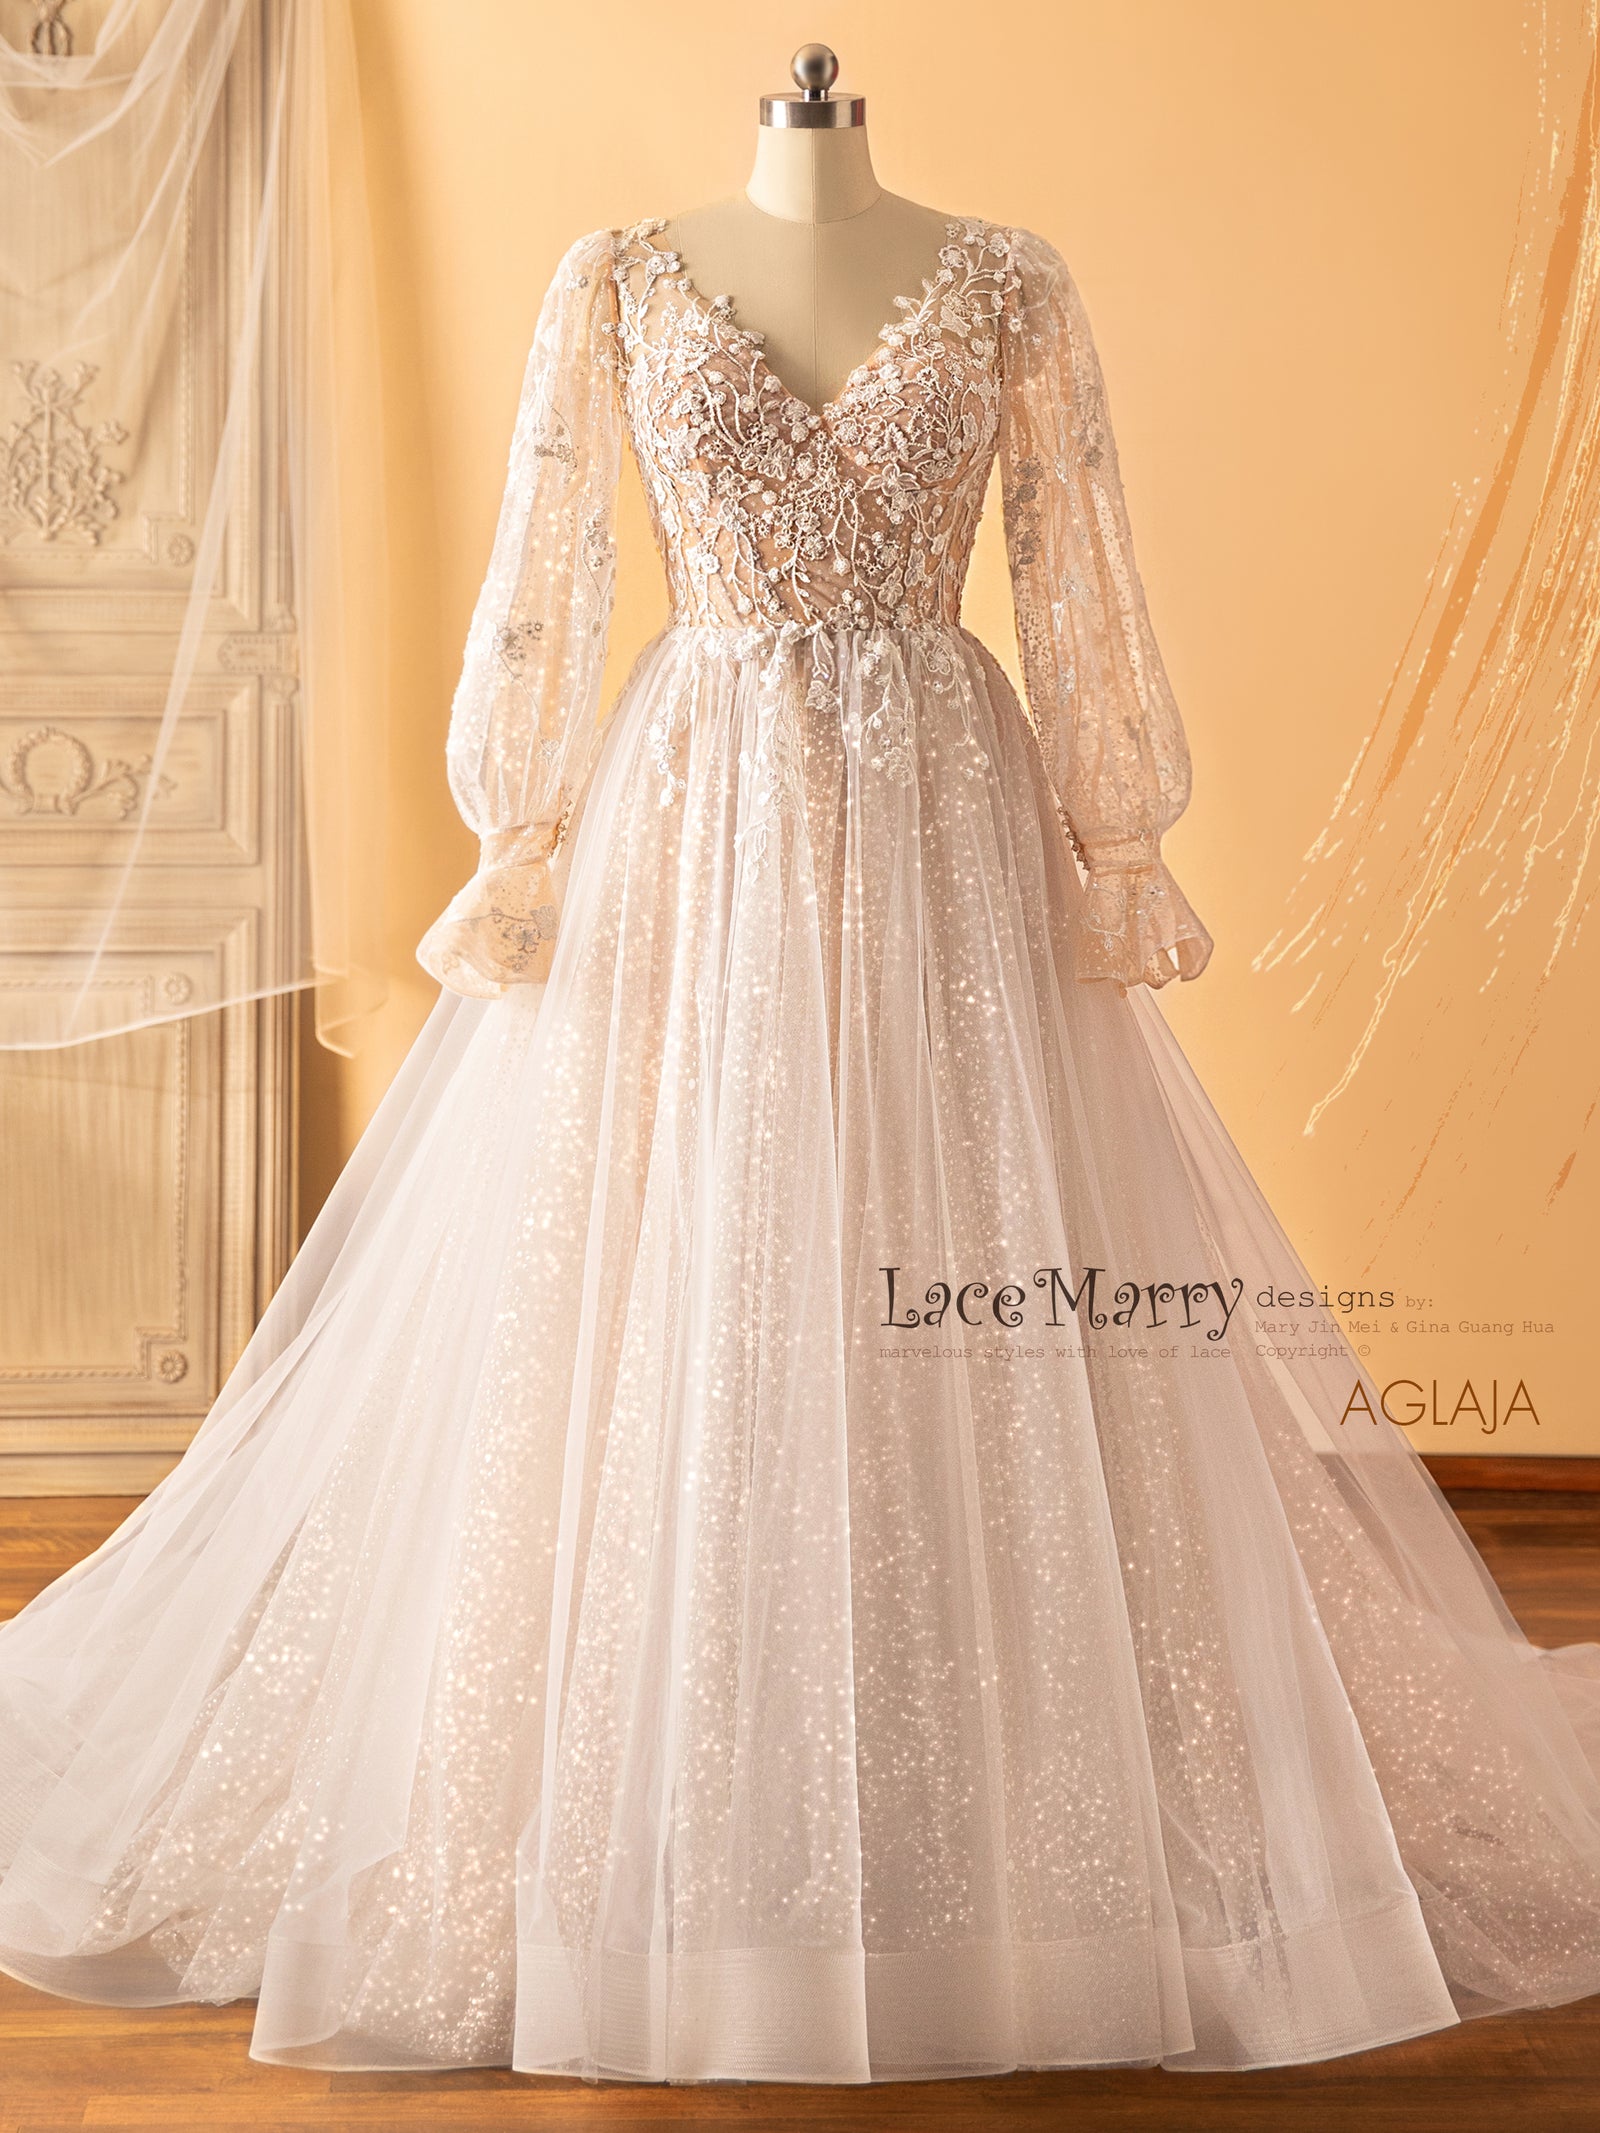 LaceMarry - Handmade Wedding Dresses with Love of Lace